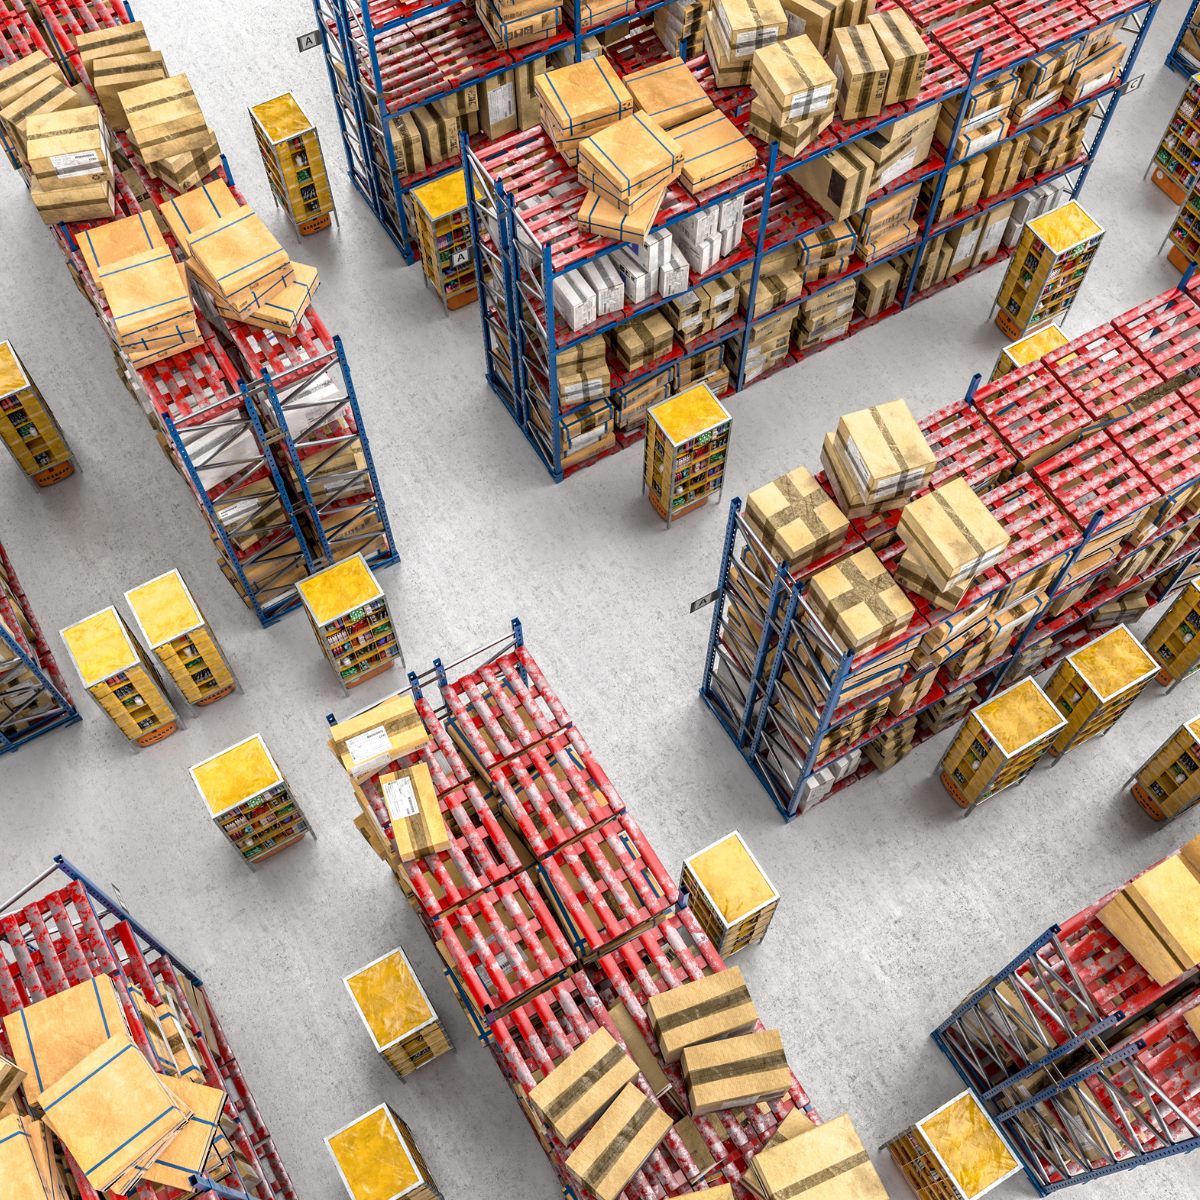 Why You Should Outsource Your Warehousing and Distribution